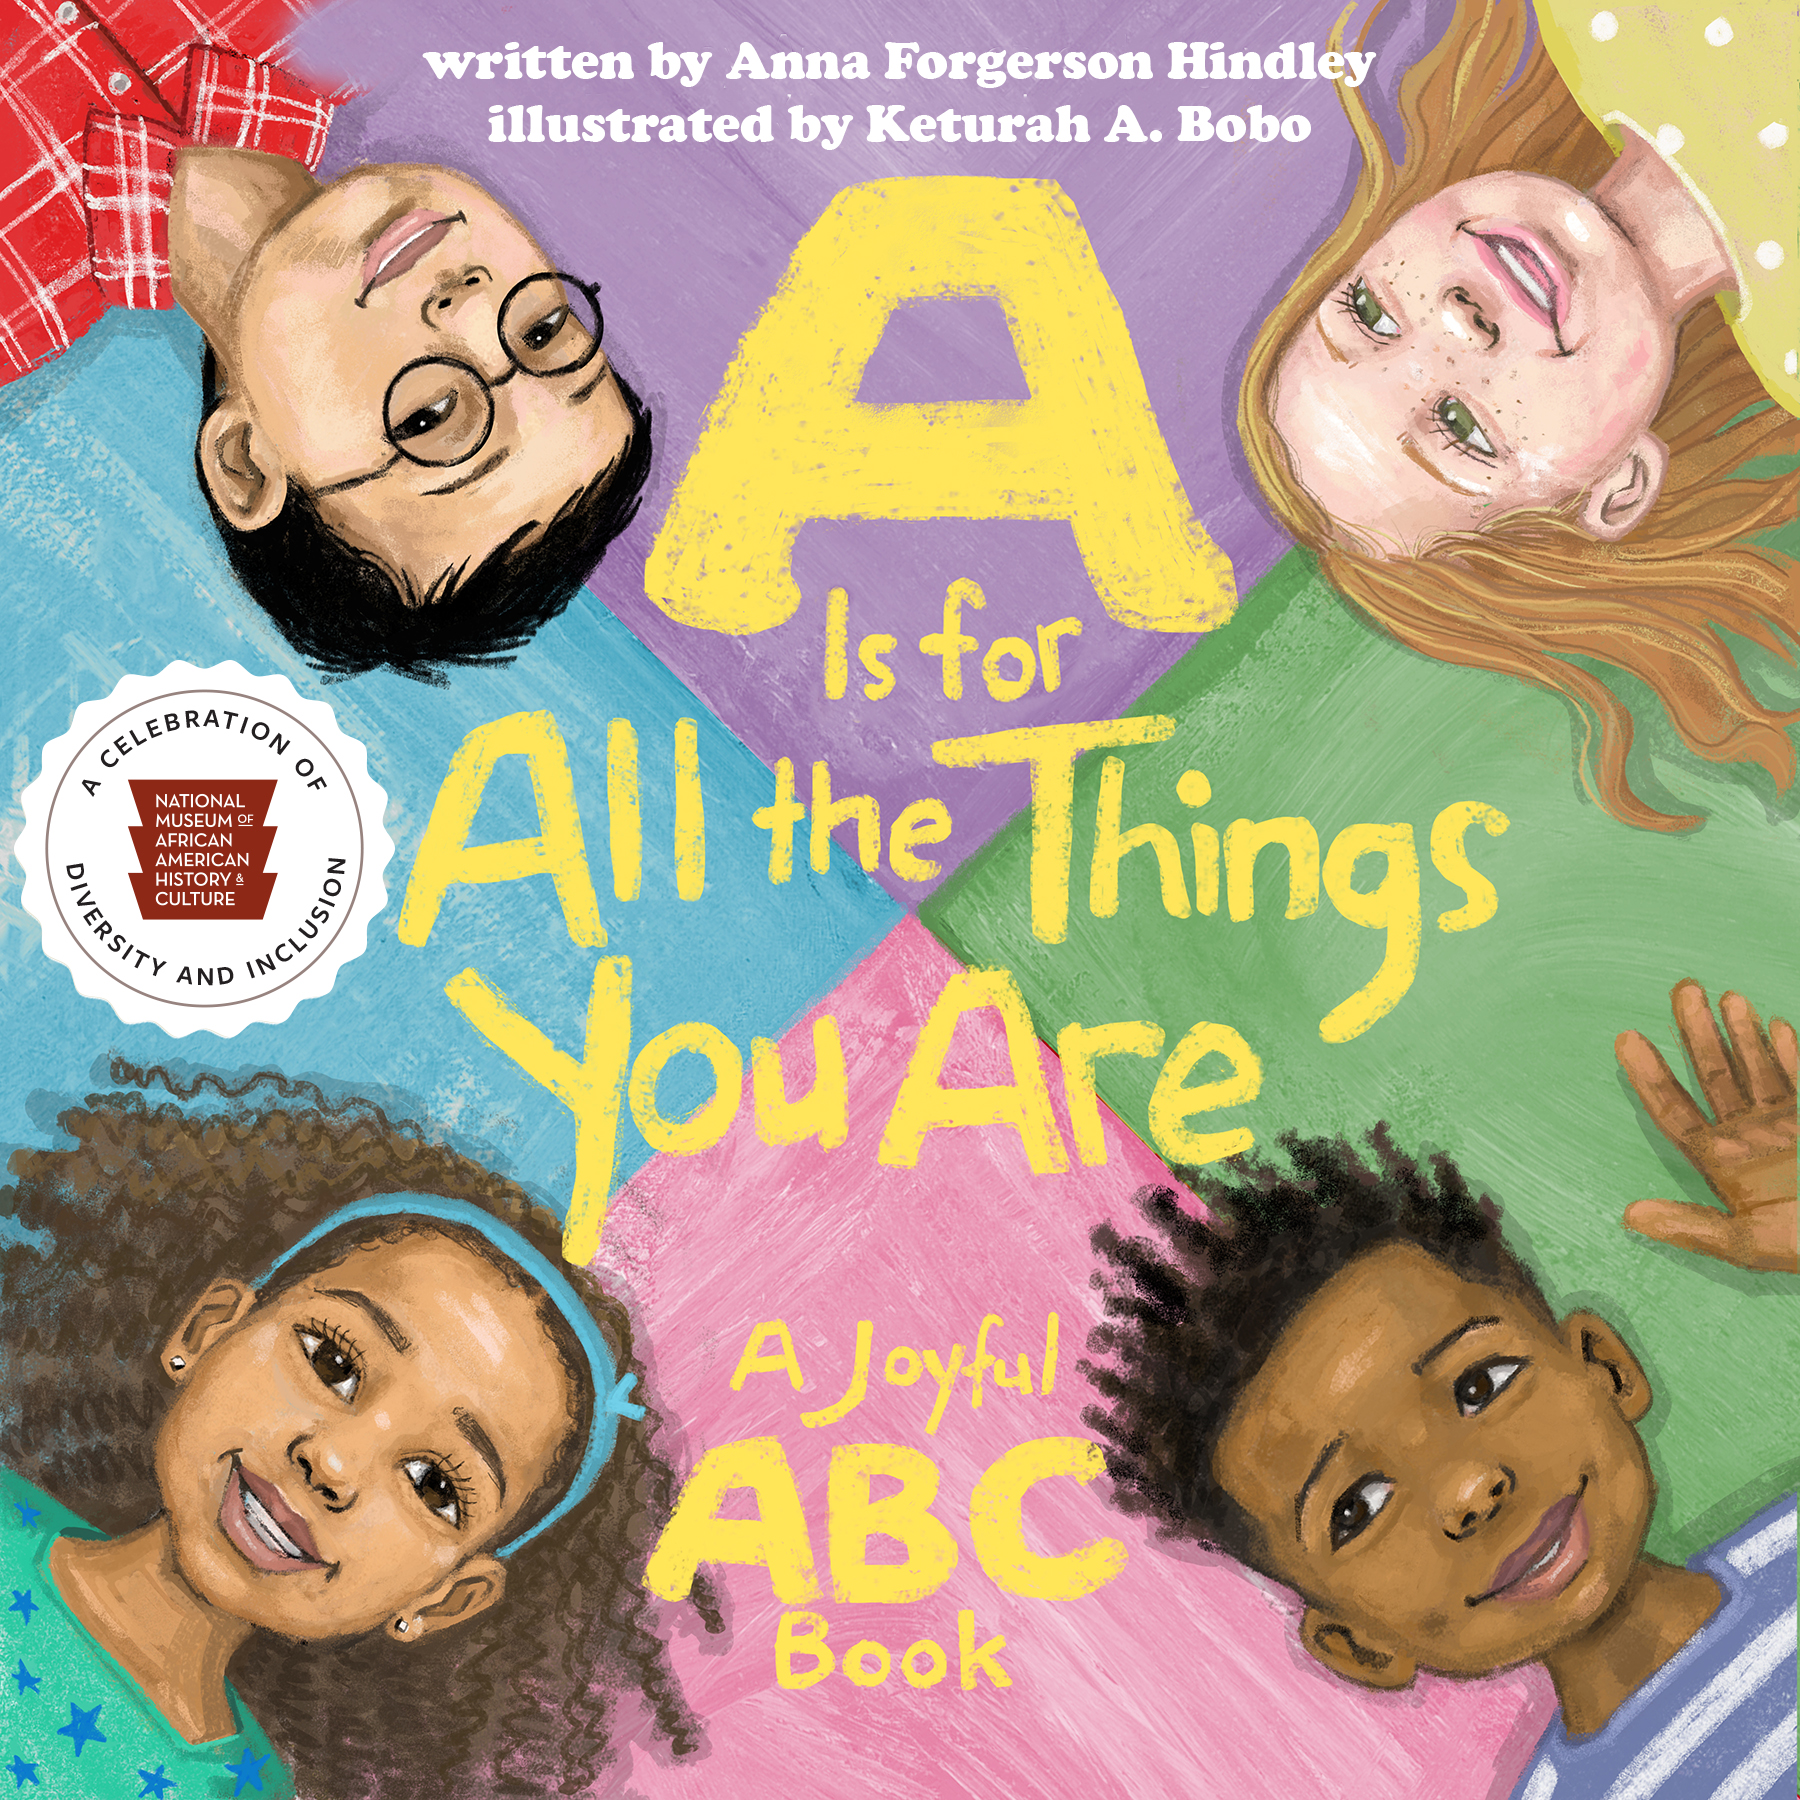 “A Is for All the Things You Are: A Joyful ABC Book” cover